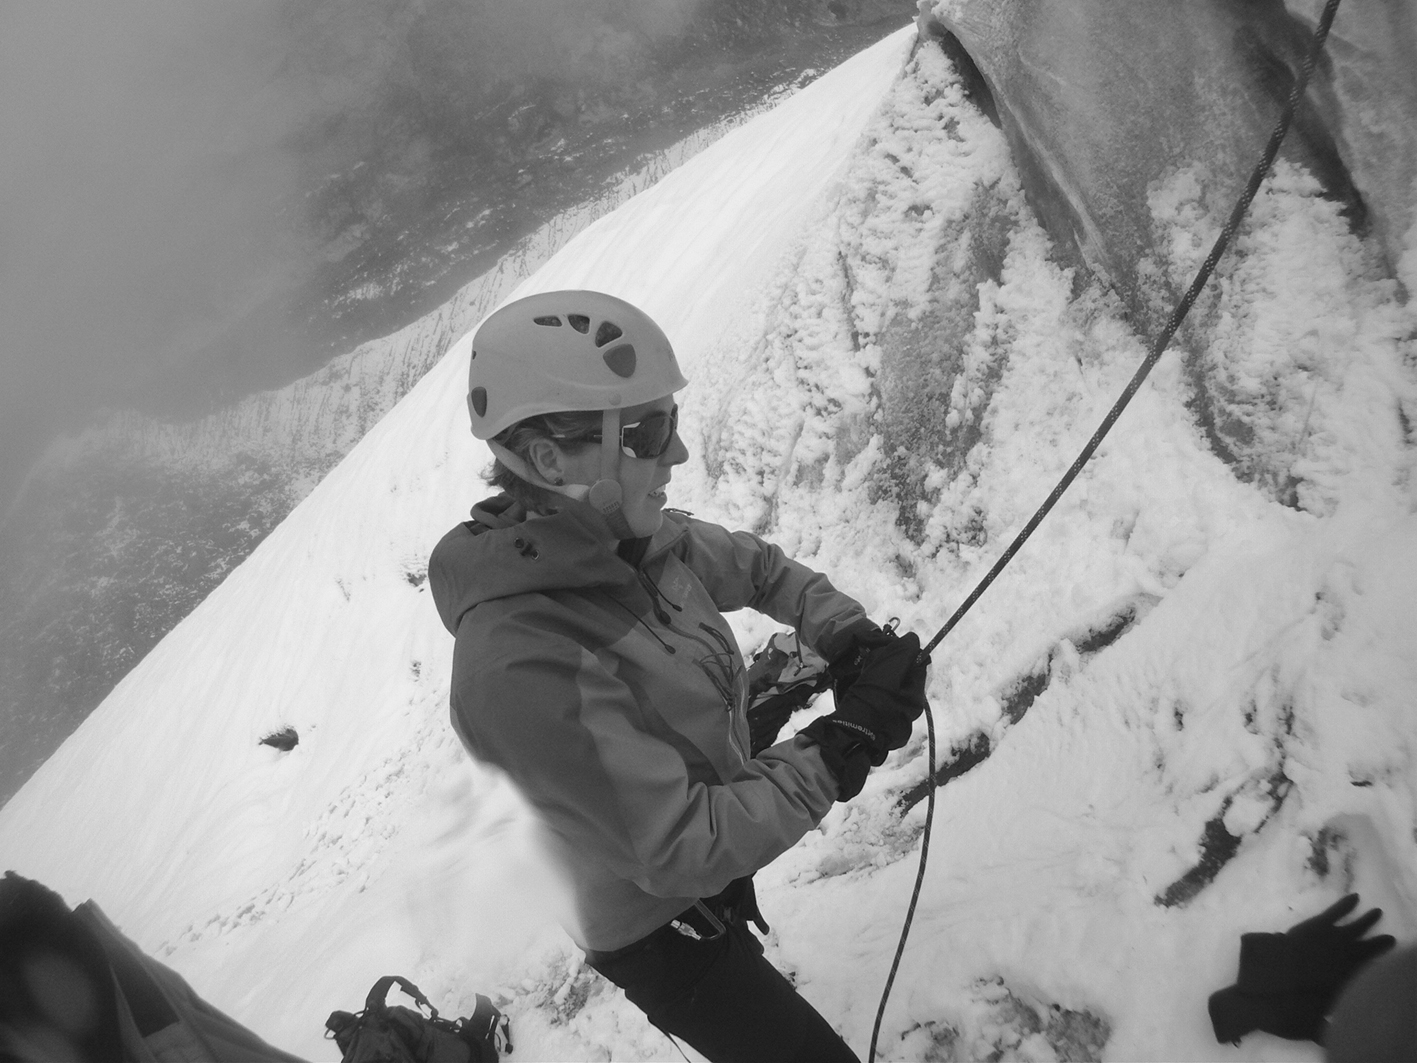 Dr Lucy Obolensky climbing on a snowy mountain with a rope